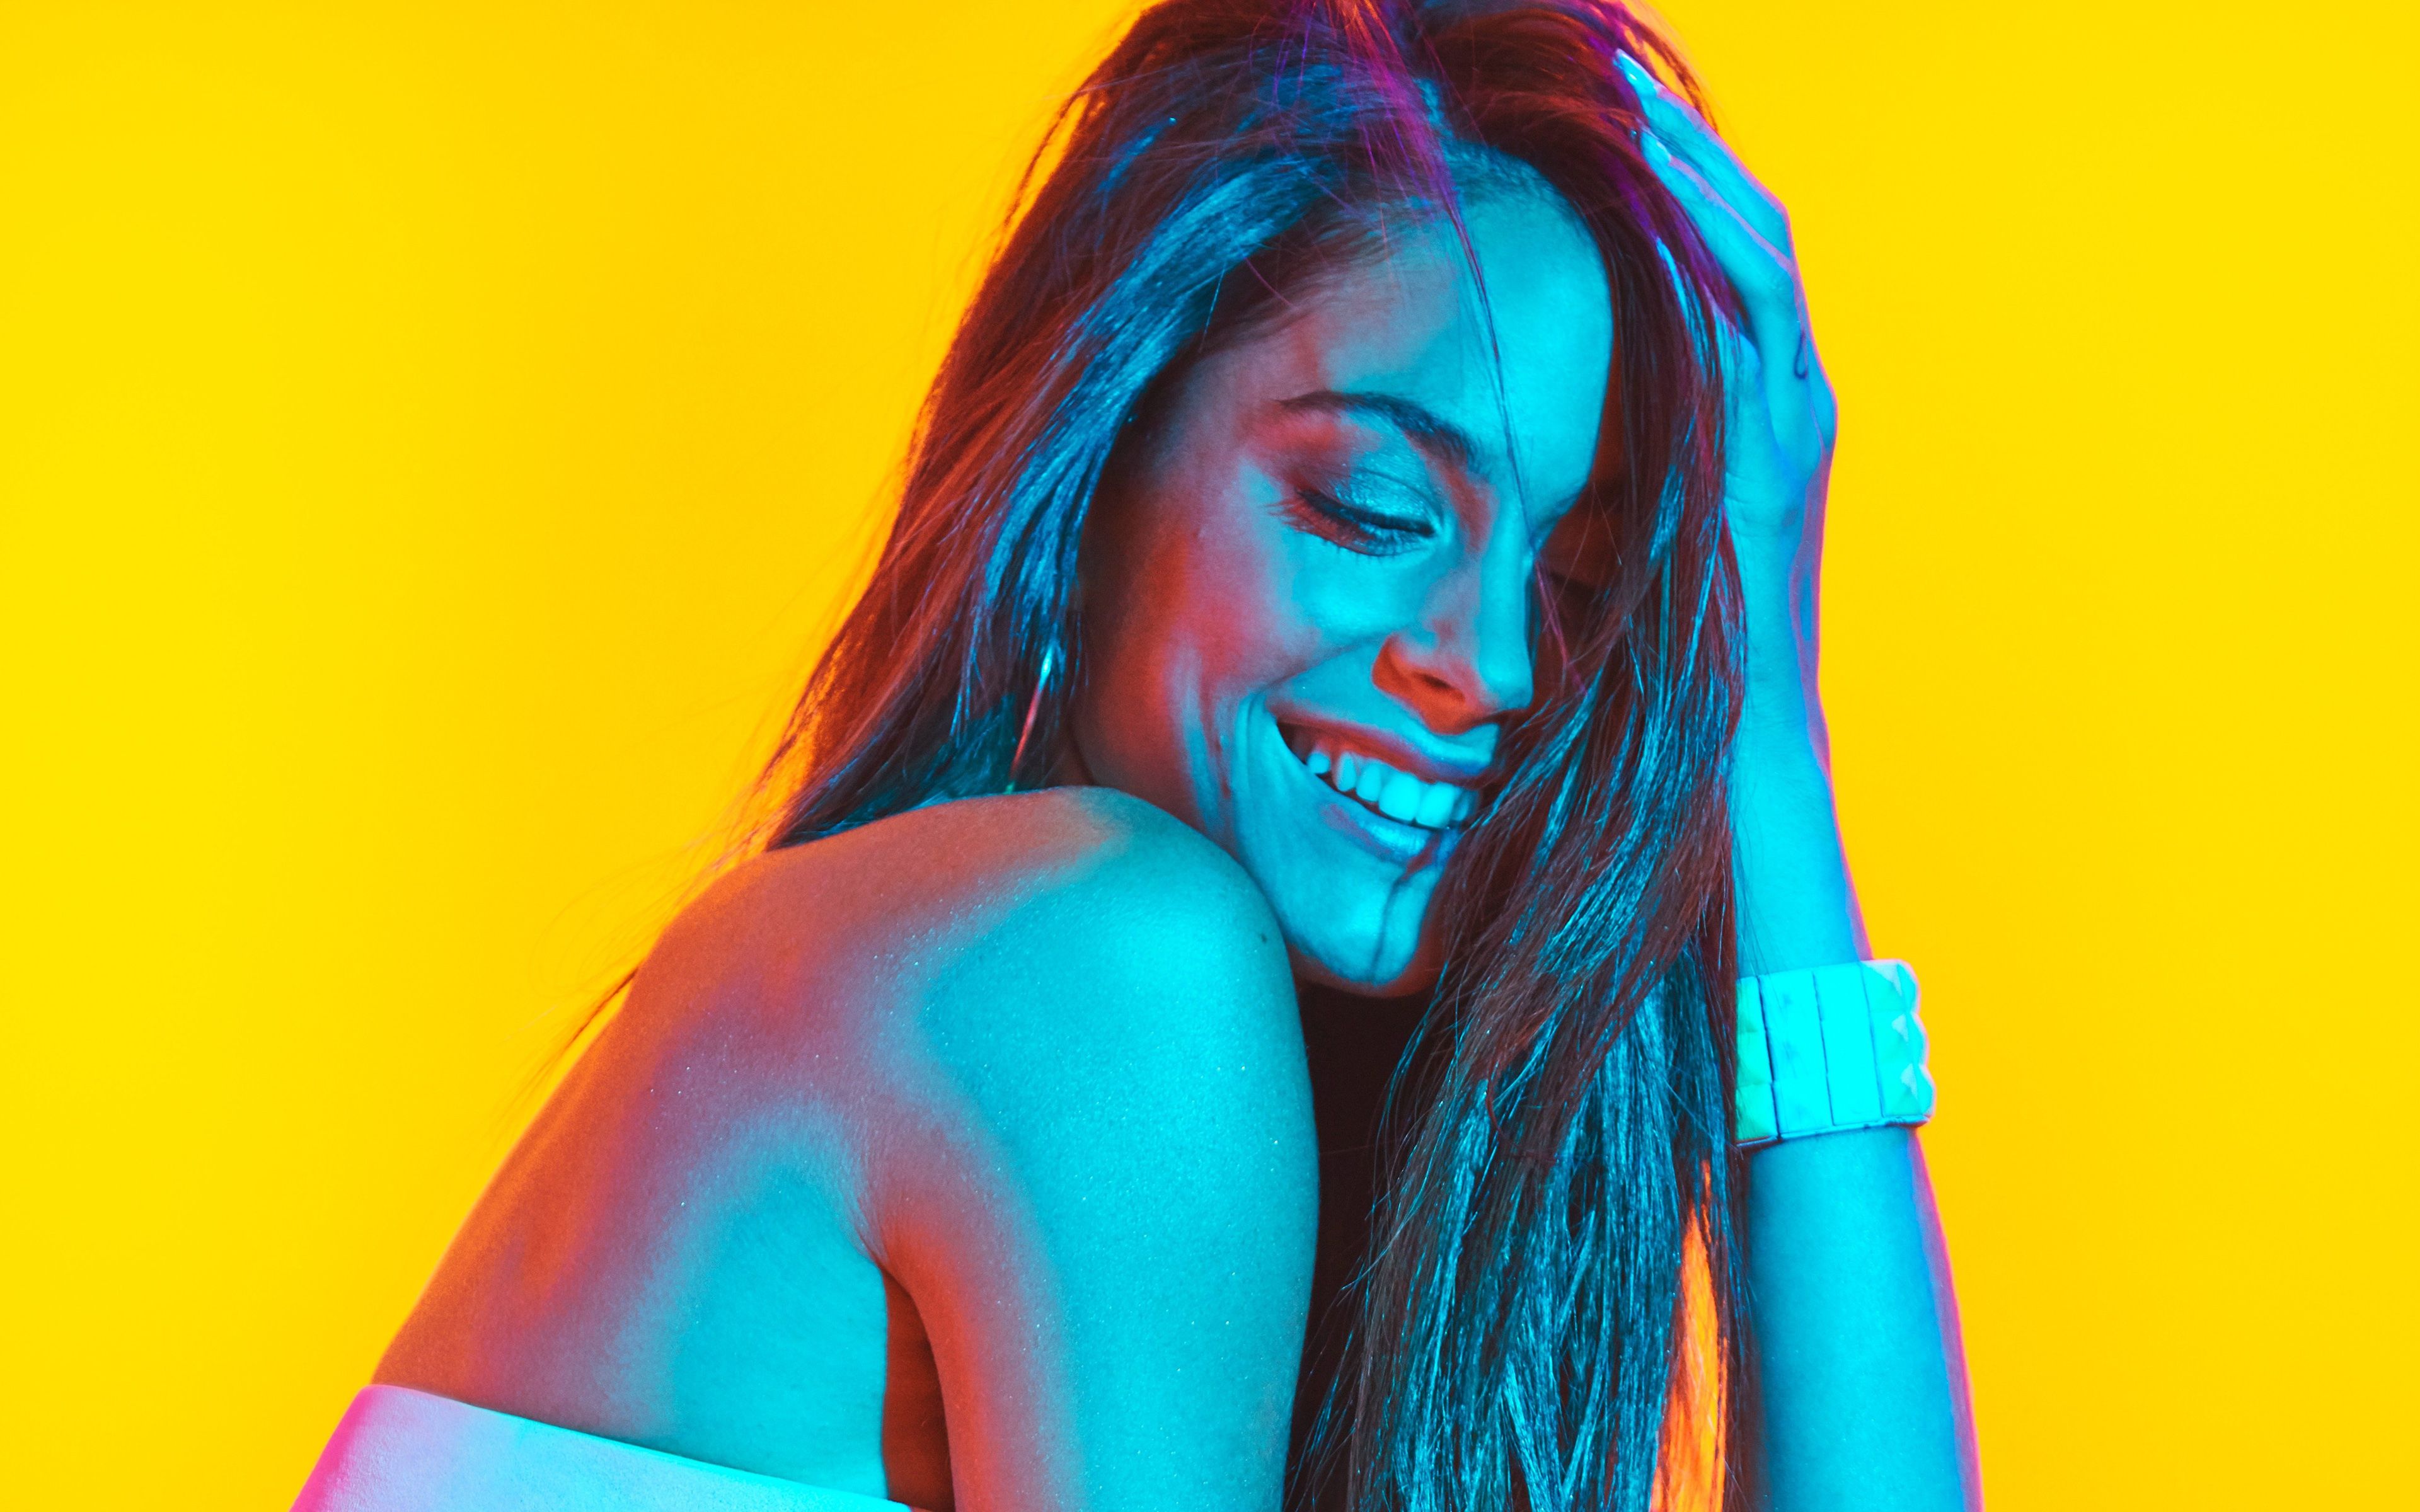 Download wallpaper TINI, 4k, argentine singer, actress, Martina Stoessel, beauty for desktop with resolution 3840x2400. High Quality HD picture wallpaper